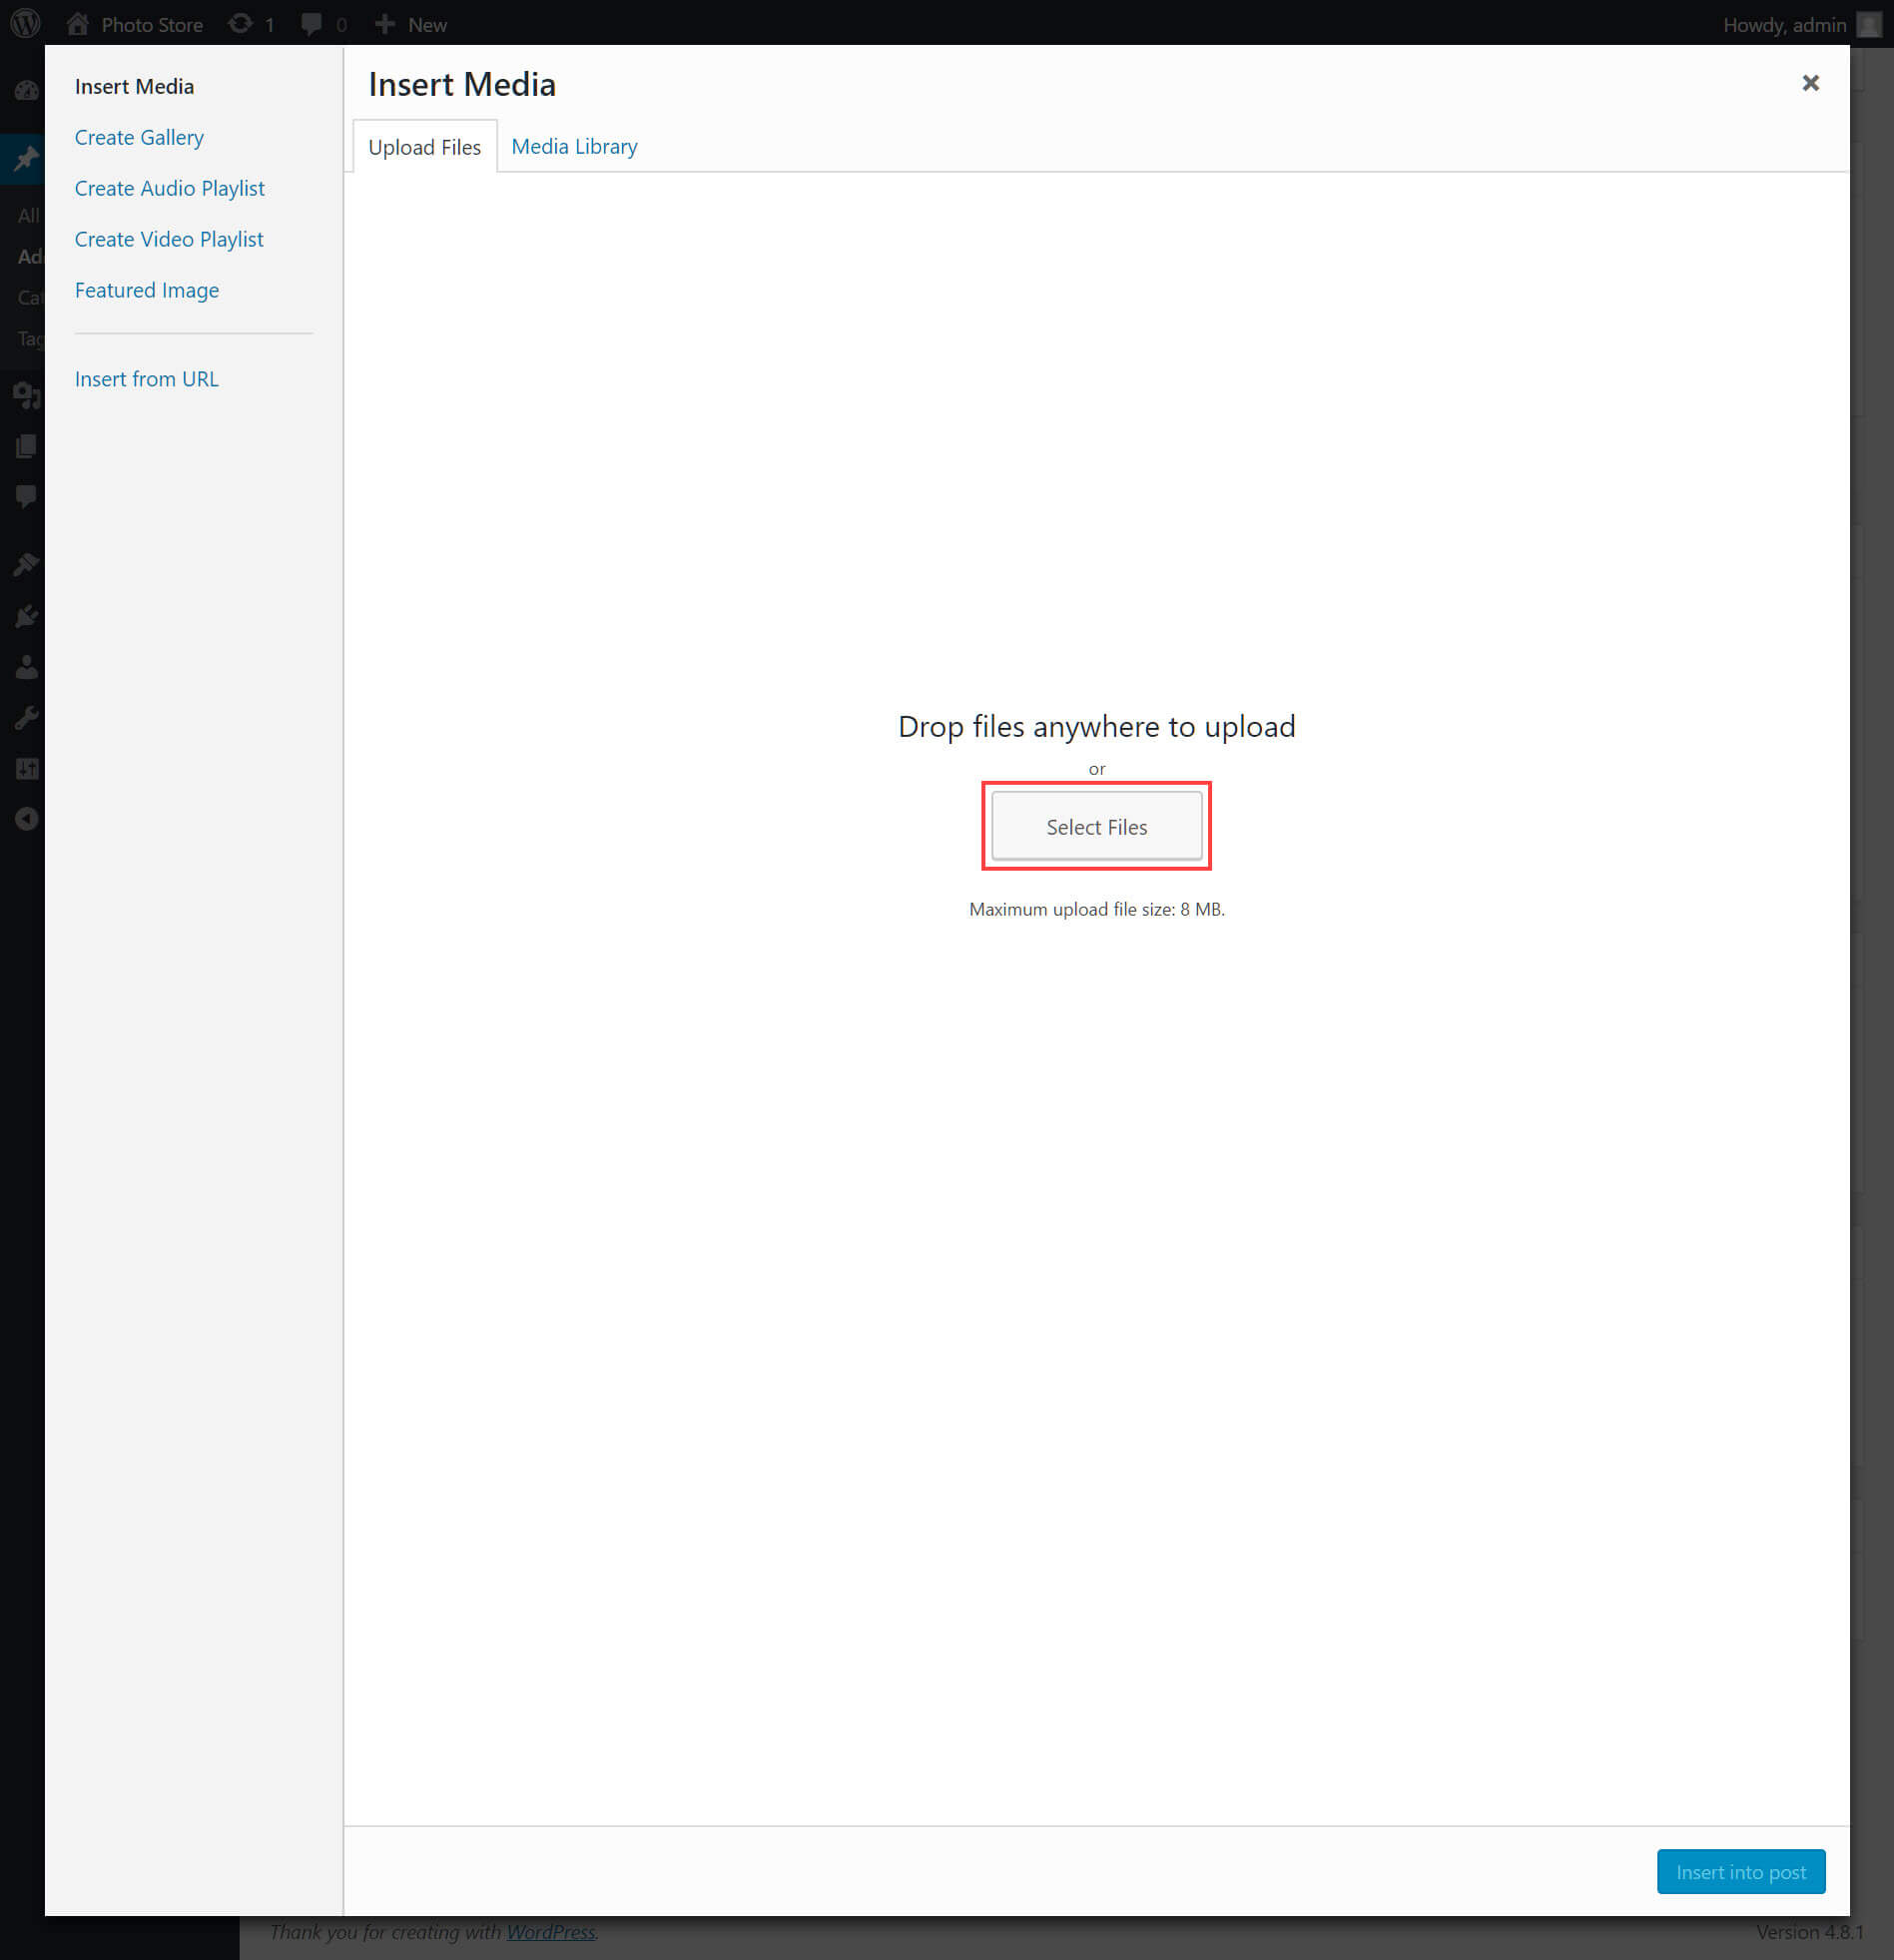 How to Fix Image Upload Issues in WordPress